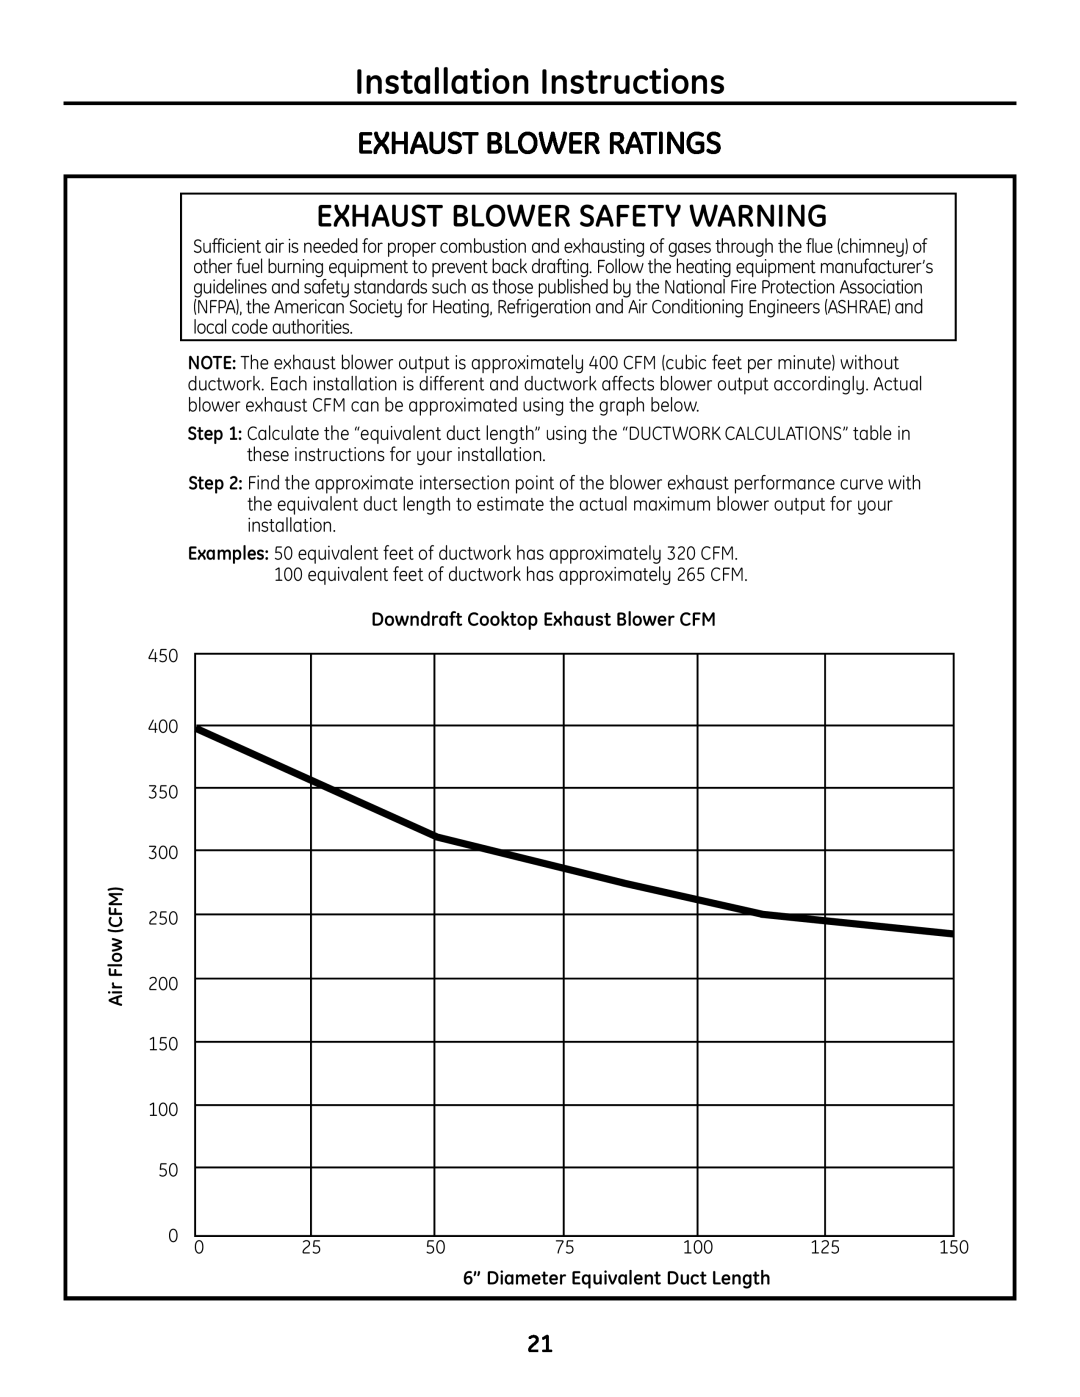 GE PGP989 manual Exhaust Blower Ratings, Exhaust Blower Safety Warning, Installation Instructions, Flow CFM 